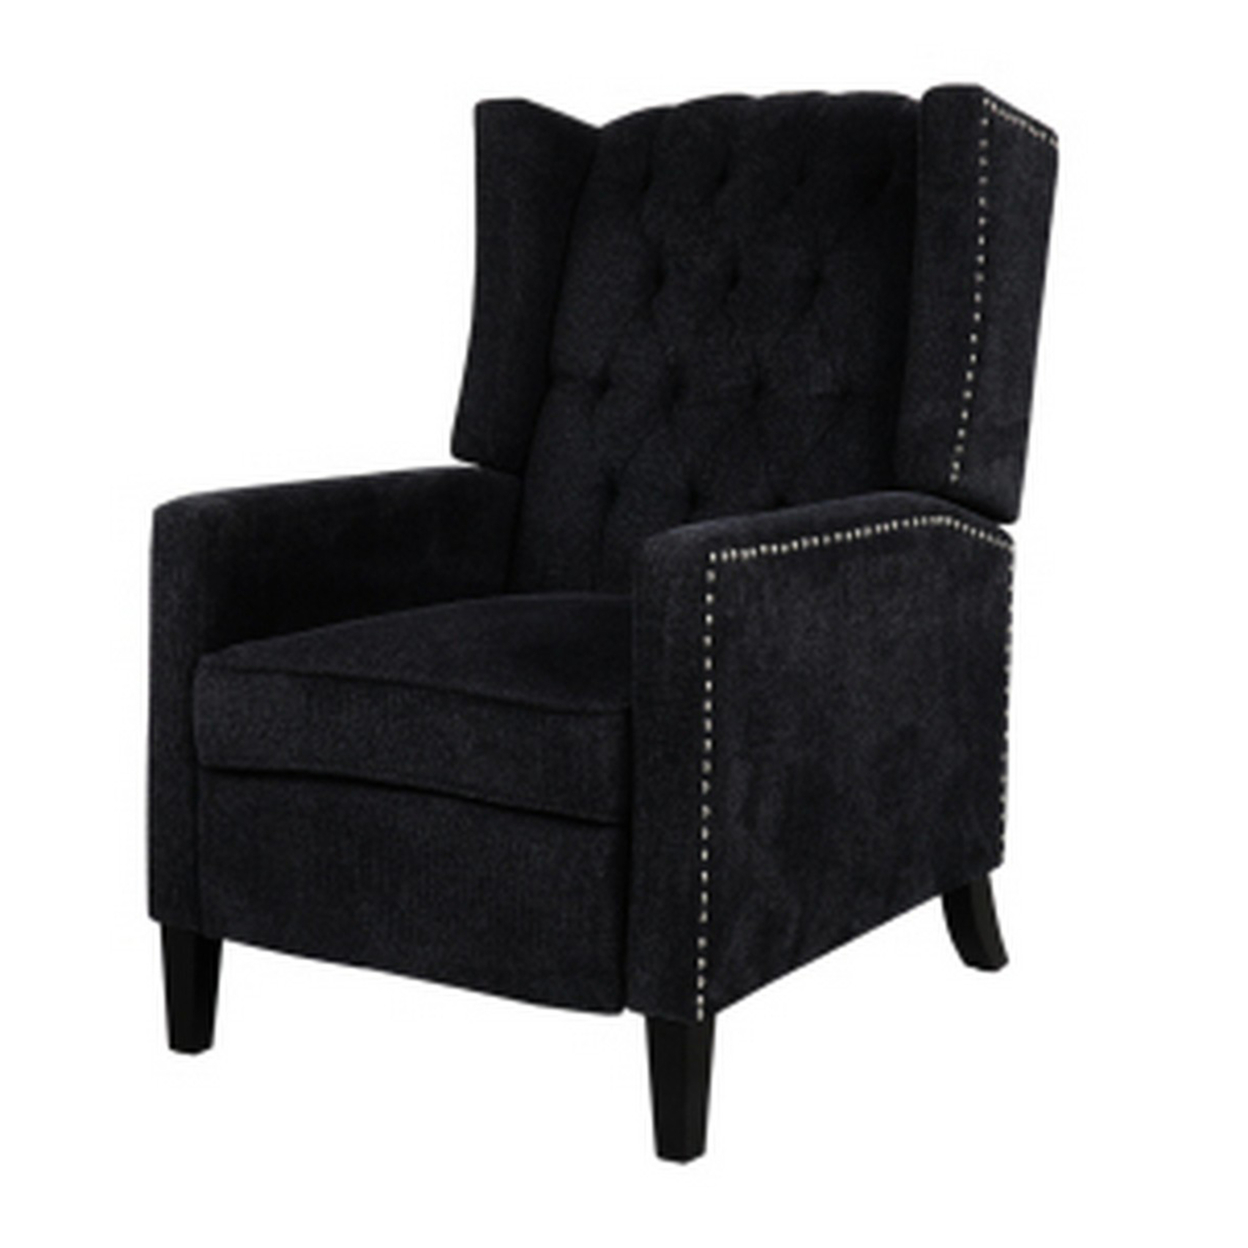 Recliner Chair With Button Tufted Pushback And Sleek Arms, Black- Saltoro Sherpi